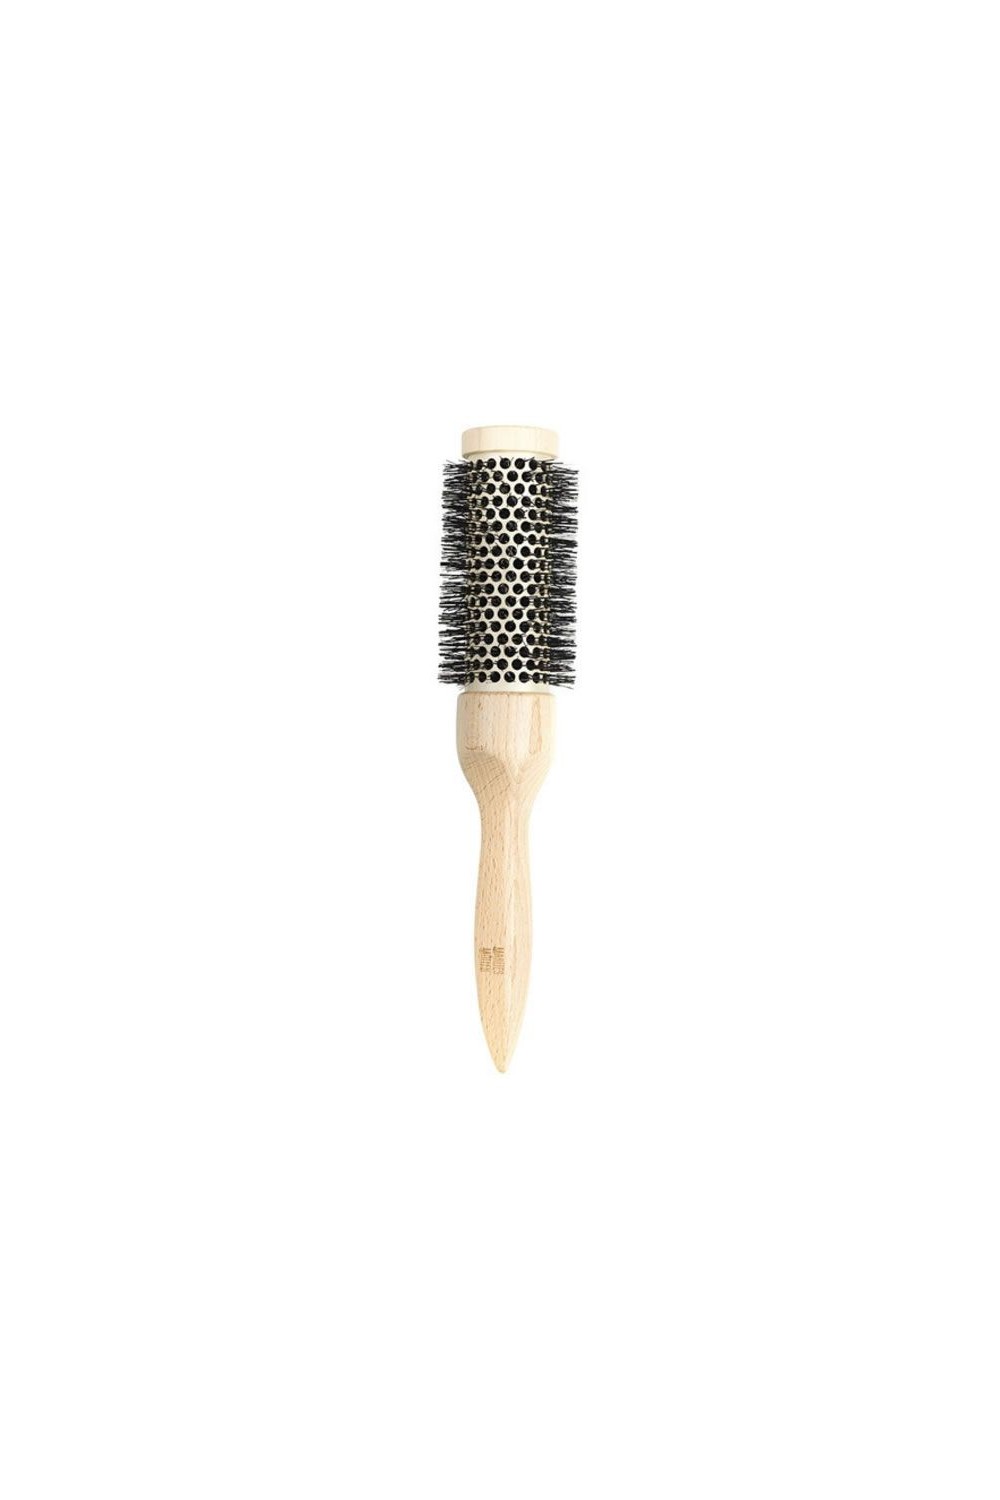 Marlies Moller Thermo Volume Ceramic Styling Brush